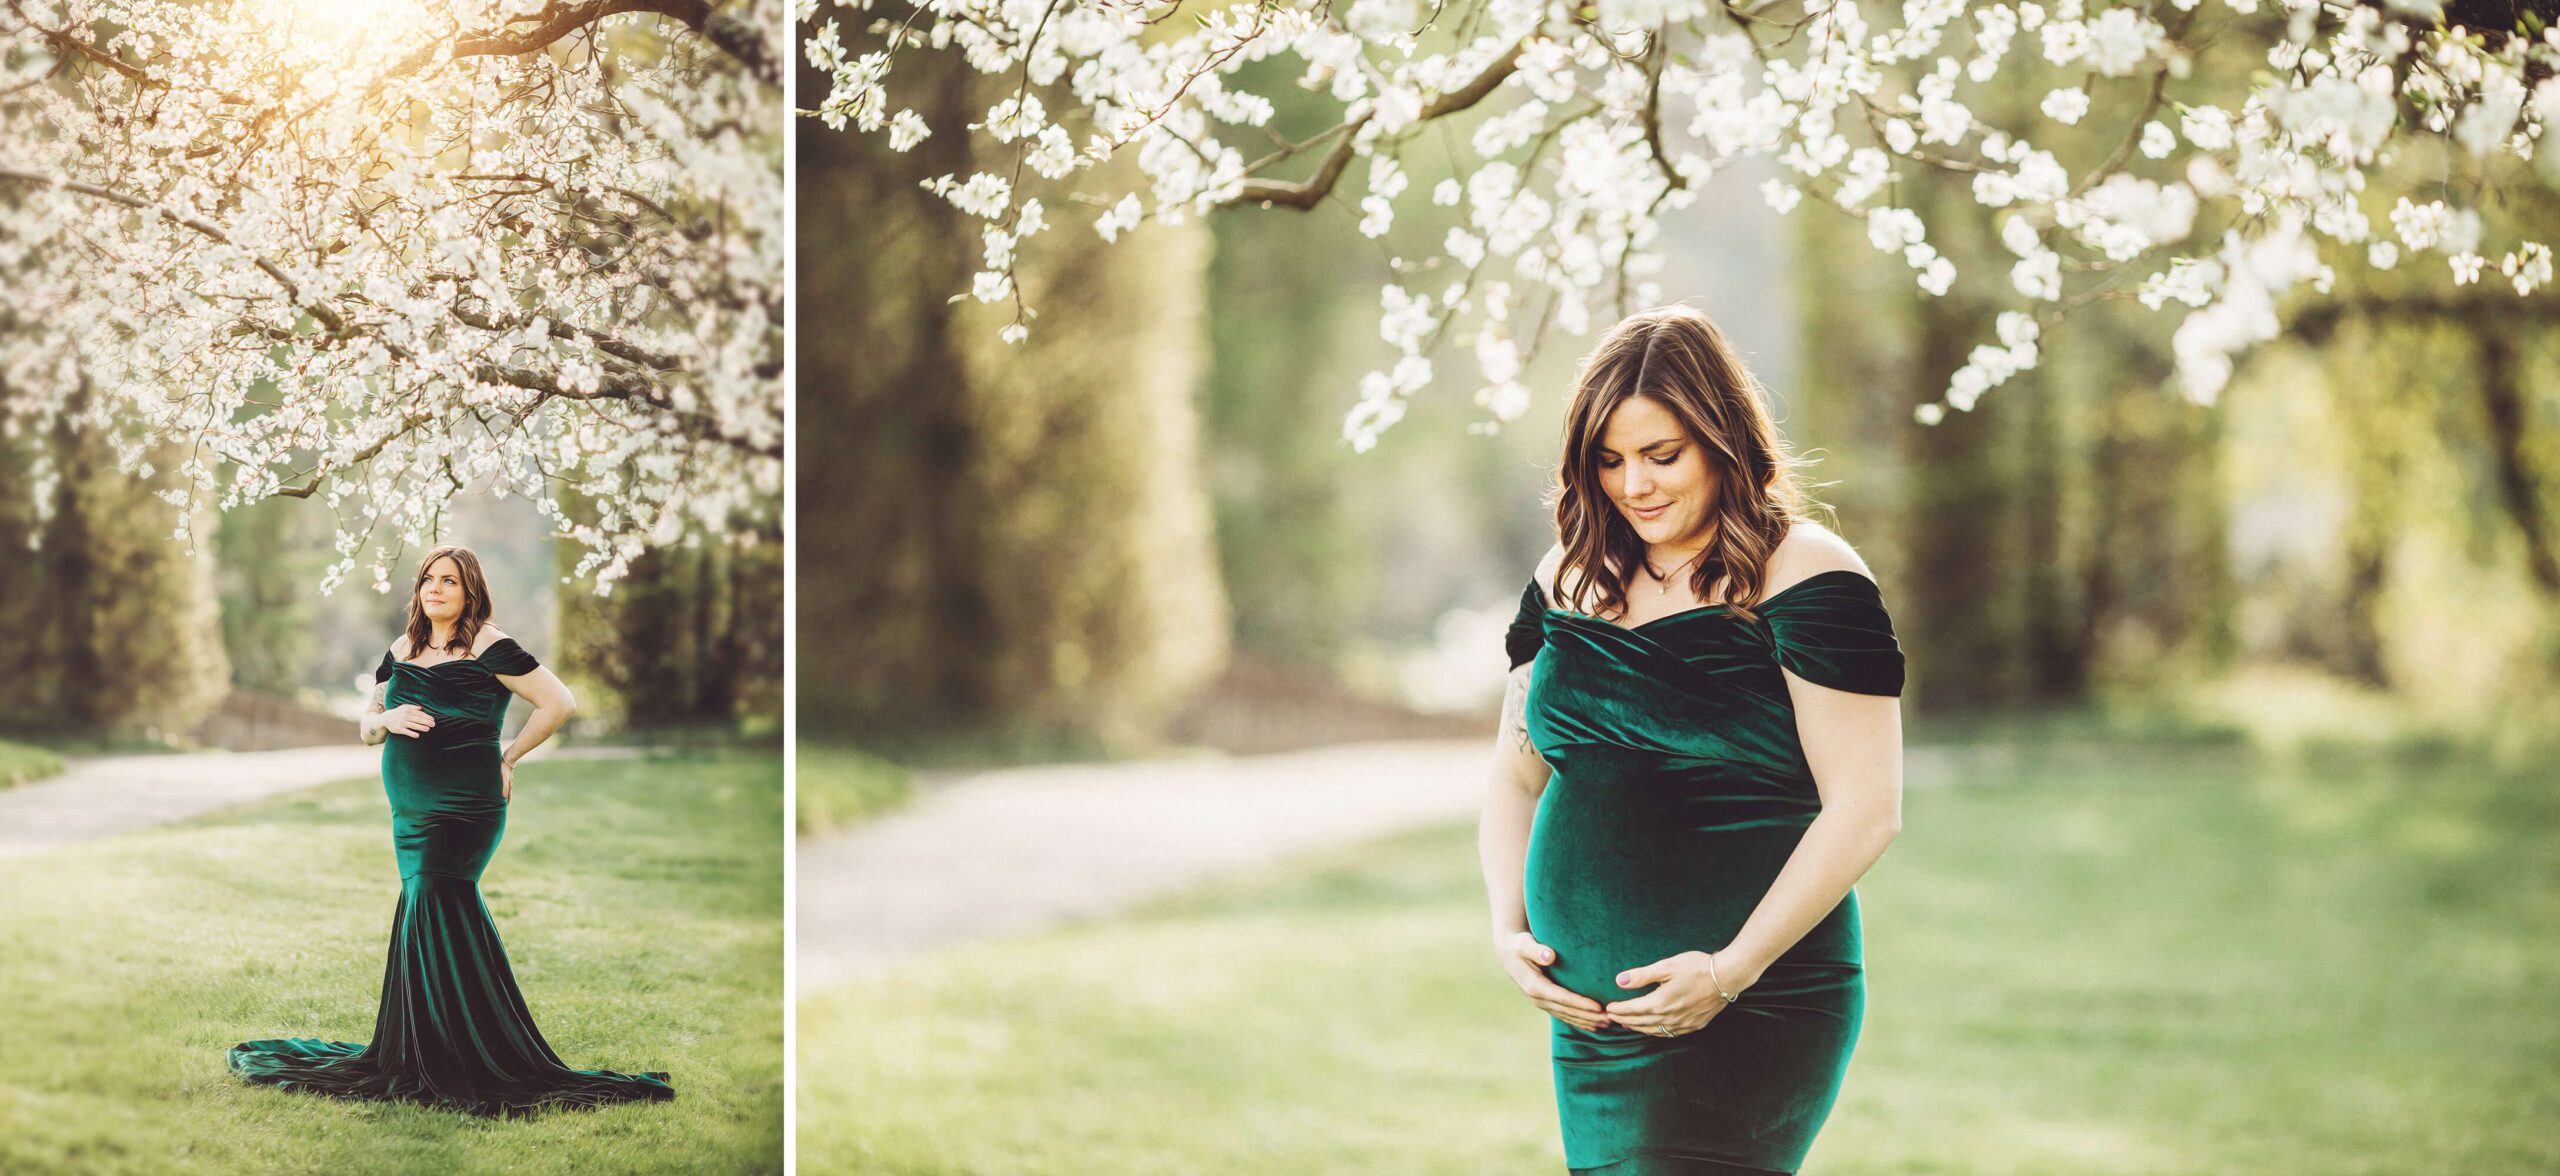 Spring will soon be upon us and we will have the opportunity to capture more beautiful spring sessions like Christina's.